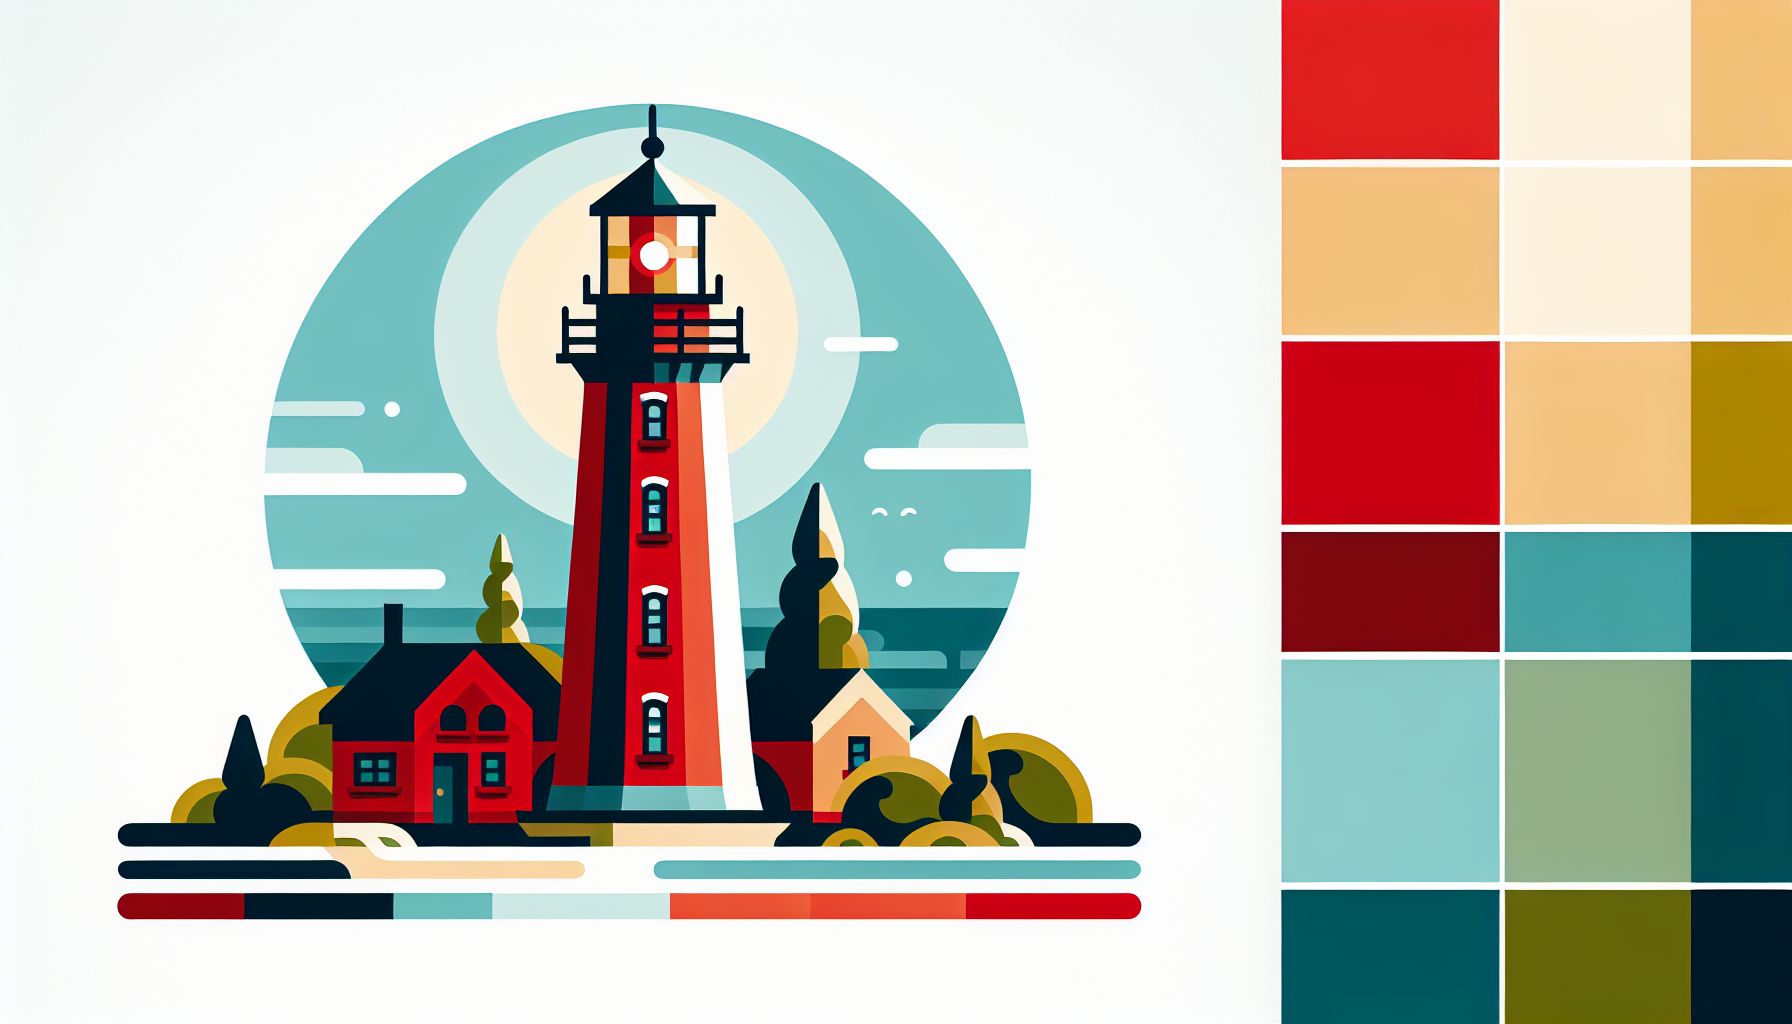 Lighthouse in flat illustration style and white background, red #f47574, green #88c7a8, yellow #fcc44b, and blue #645bc8 colors.